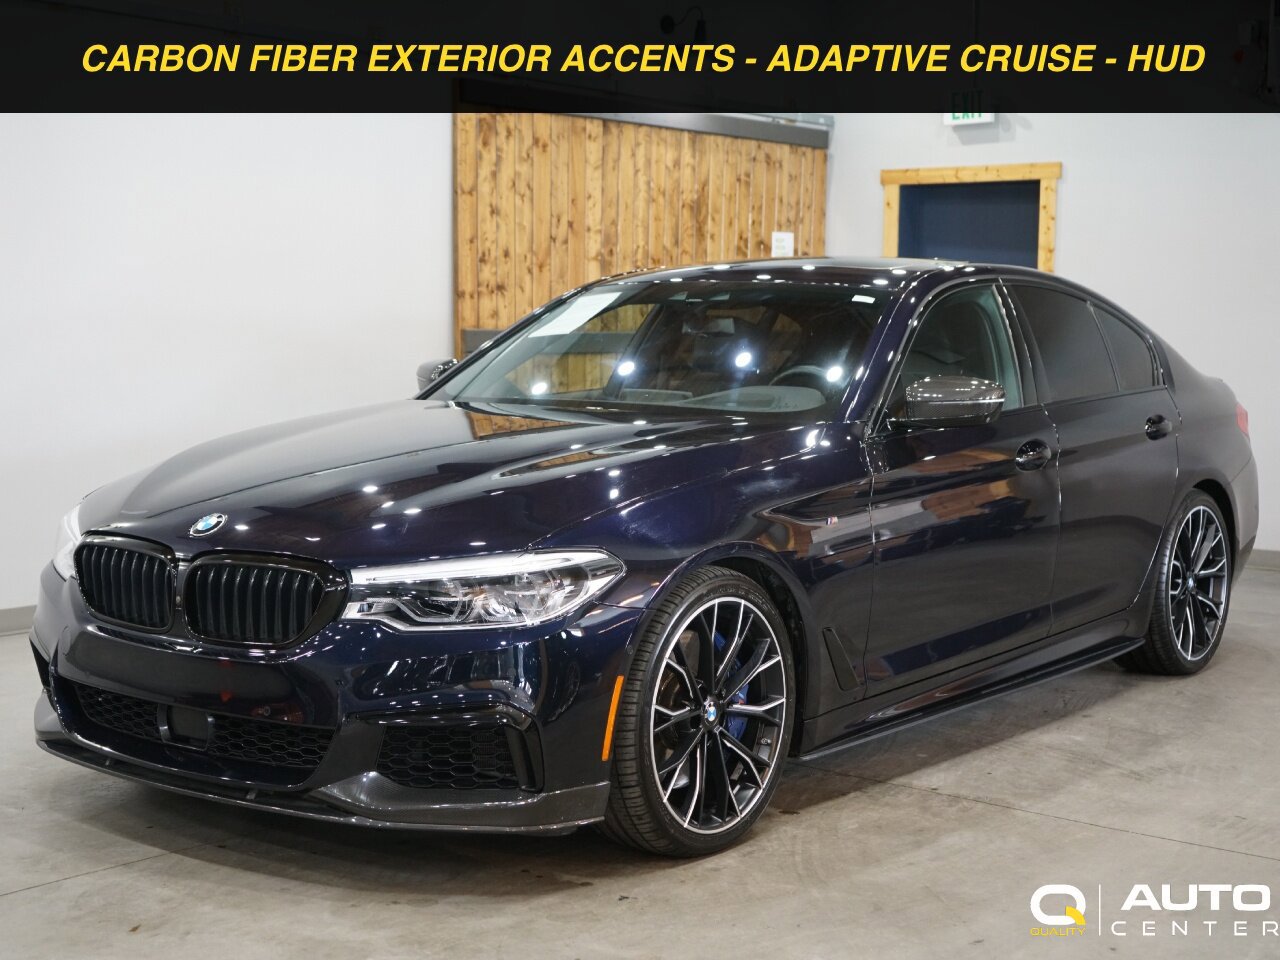 Used BMW M550i xDrive for Sale Near Me in Everett, WA - Autotrader